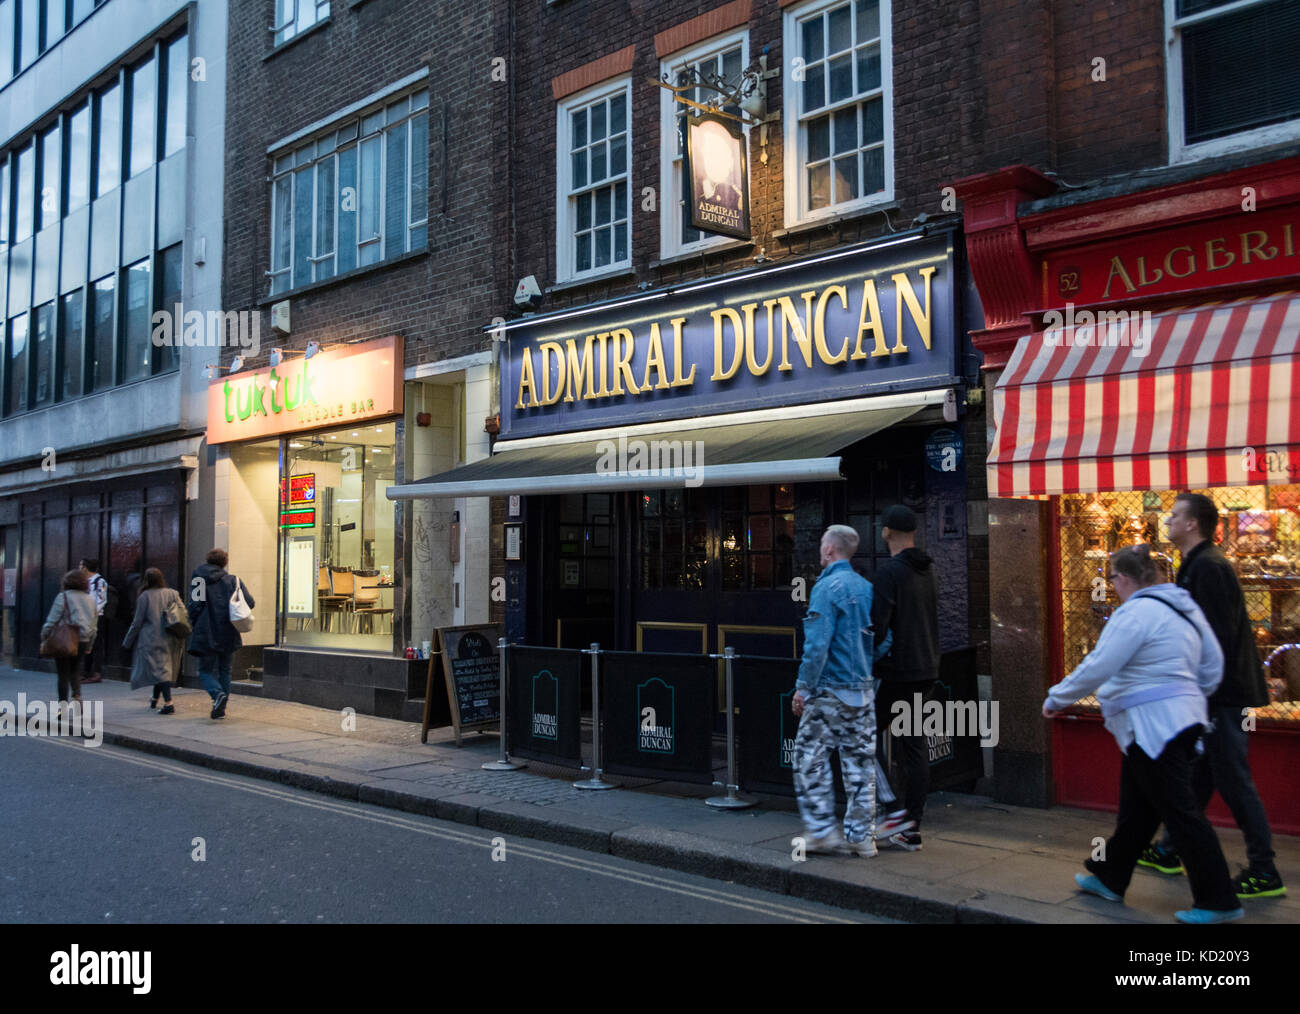 The famous Admiral Duncan gay pub on Old Compton Street, Soho, LOndon, UK Stock Photo